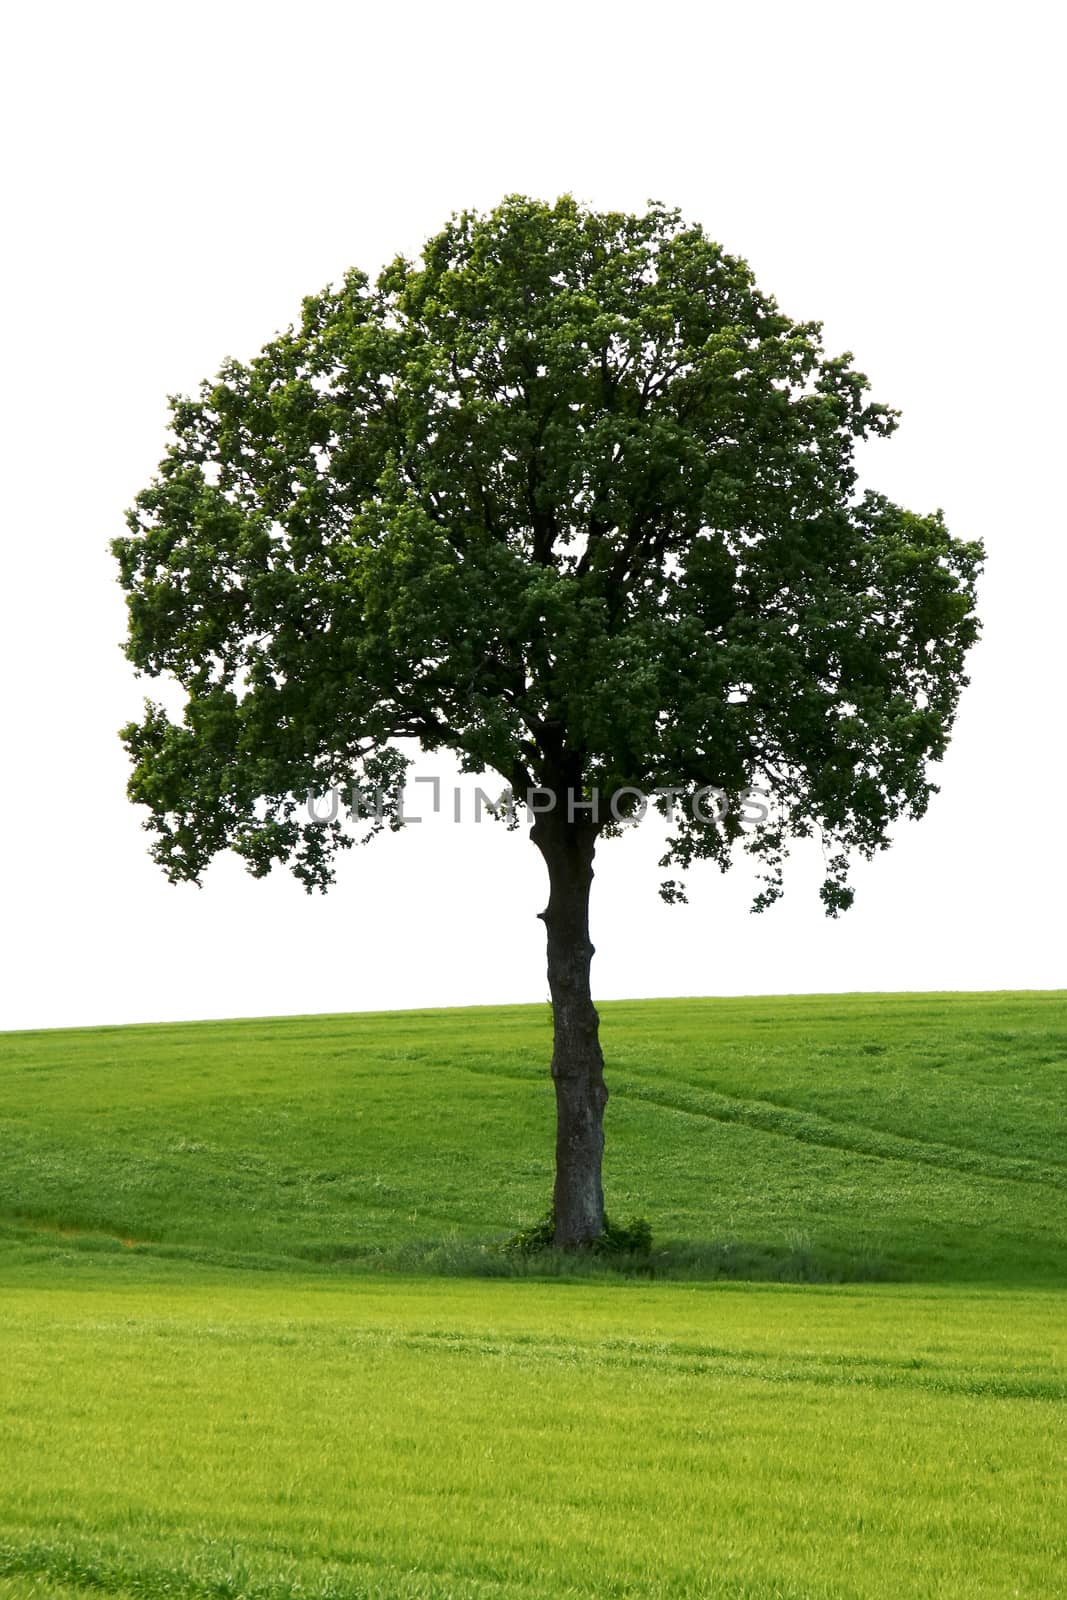 An image of a nice tree in the green meadow